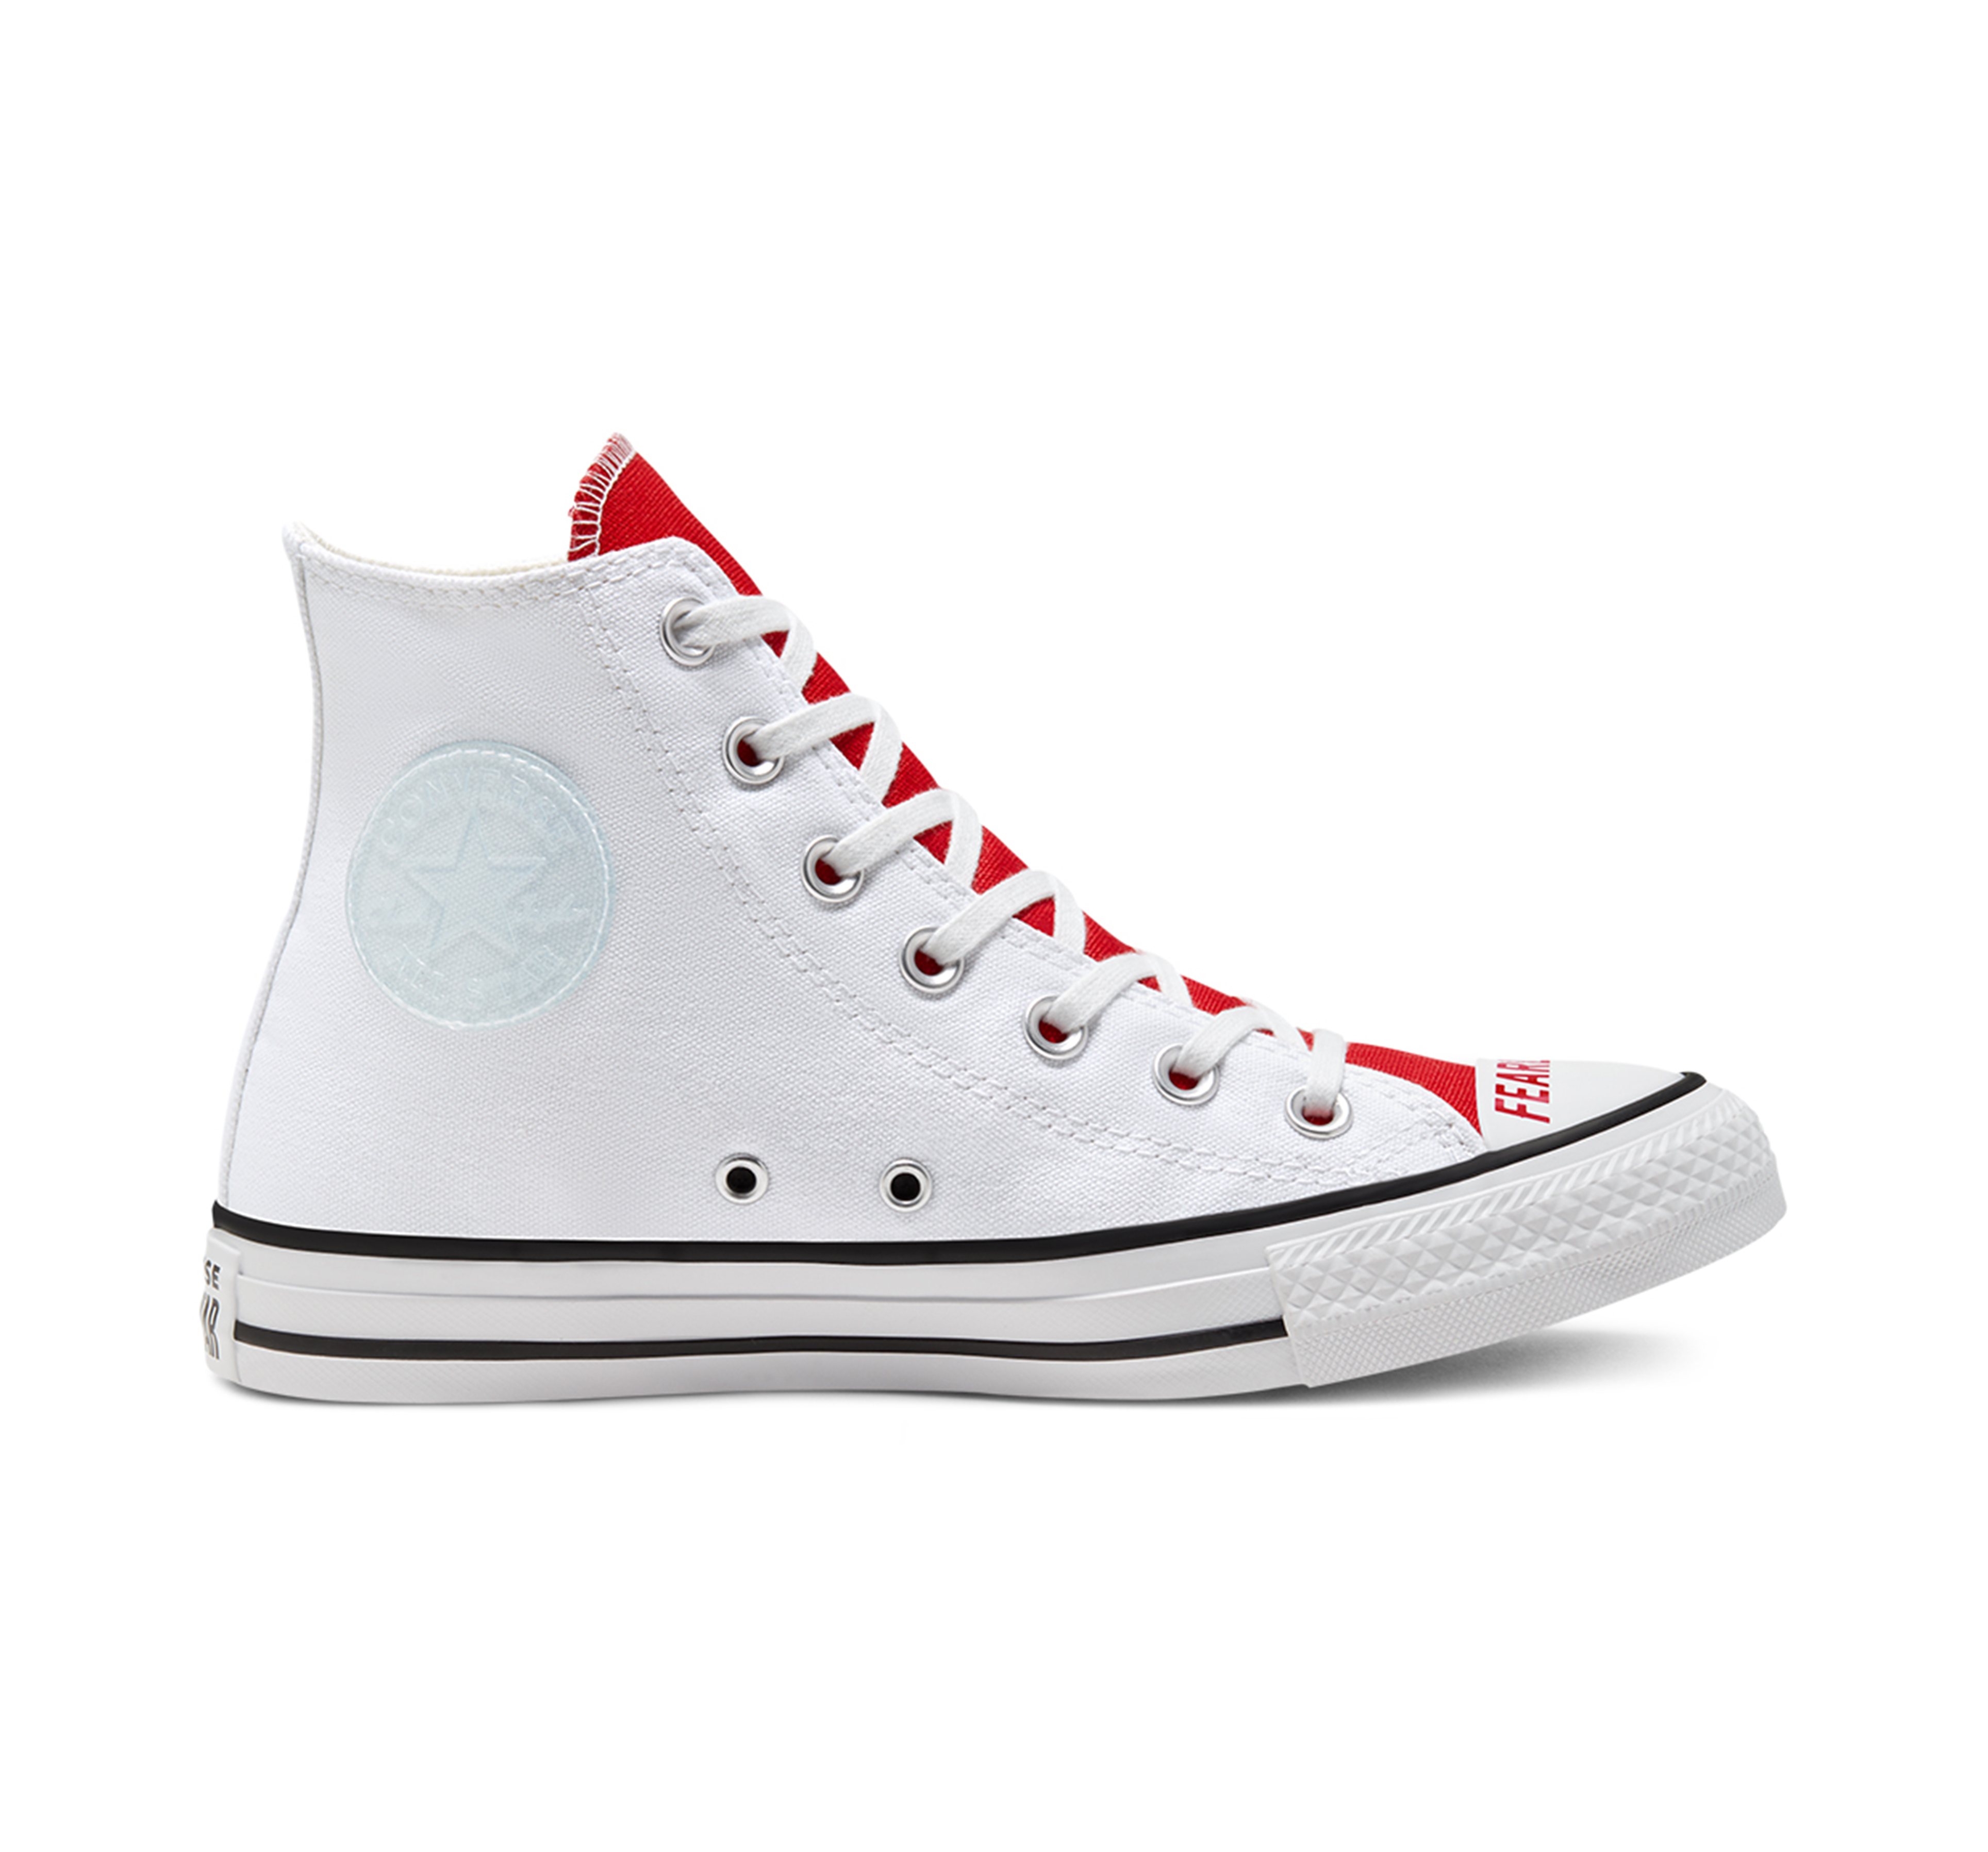 cheapest place buy converse all stars